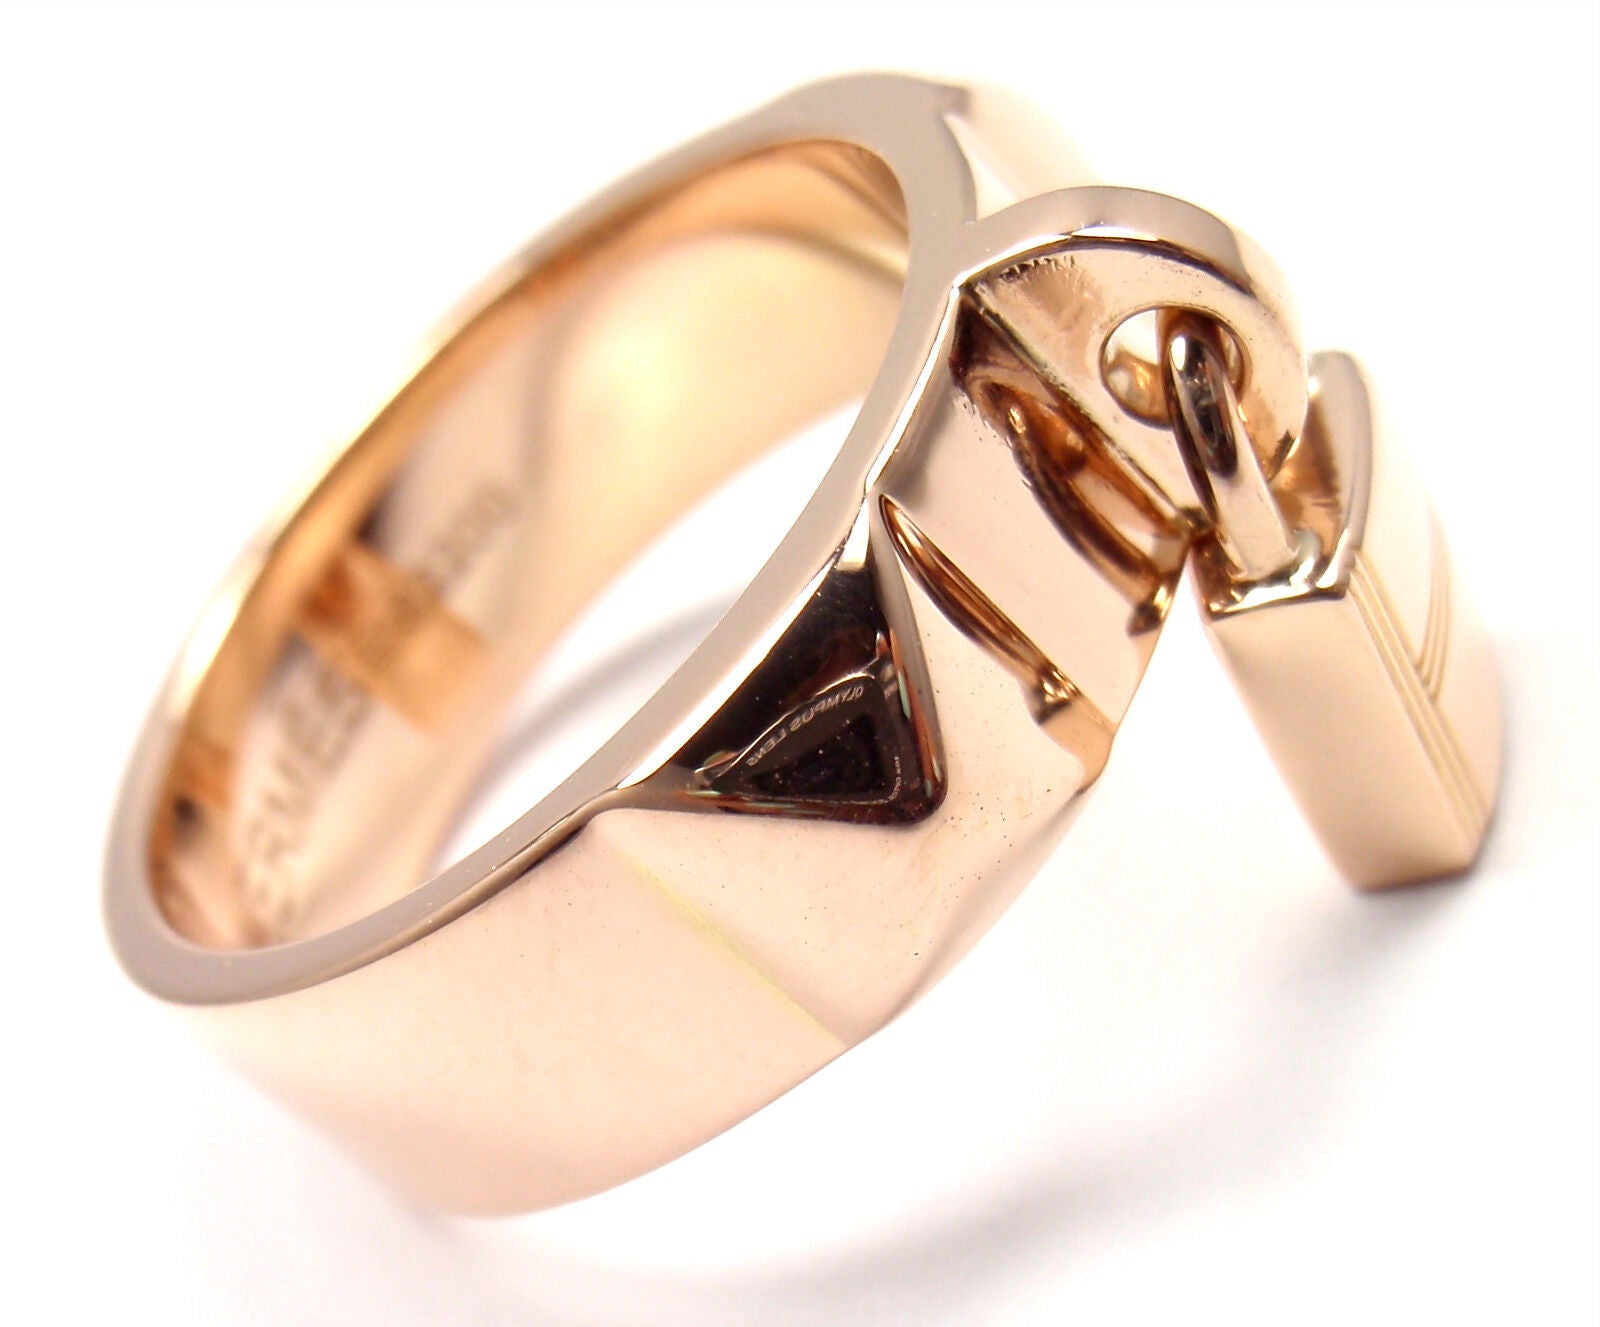 Authentic! Hermes 18k Rose Gold Collier De Chien Lock Band Ring Size 49 US  4 3/4